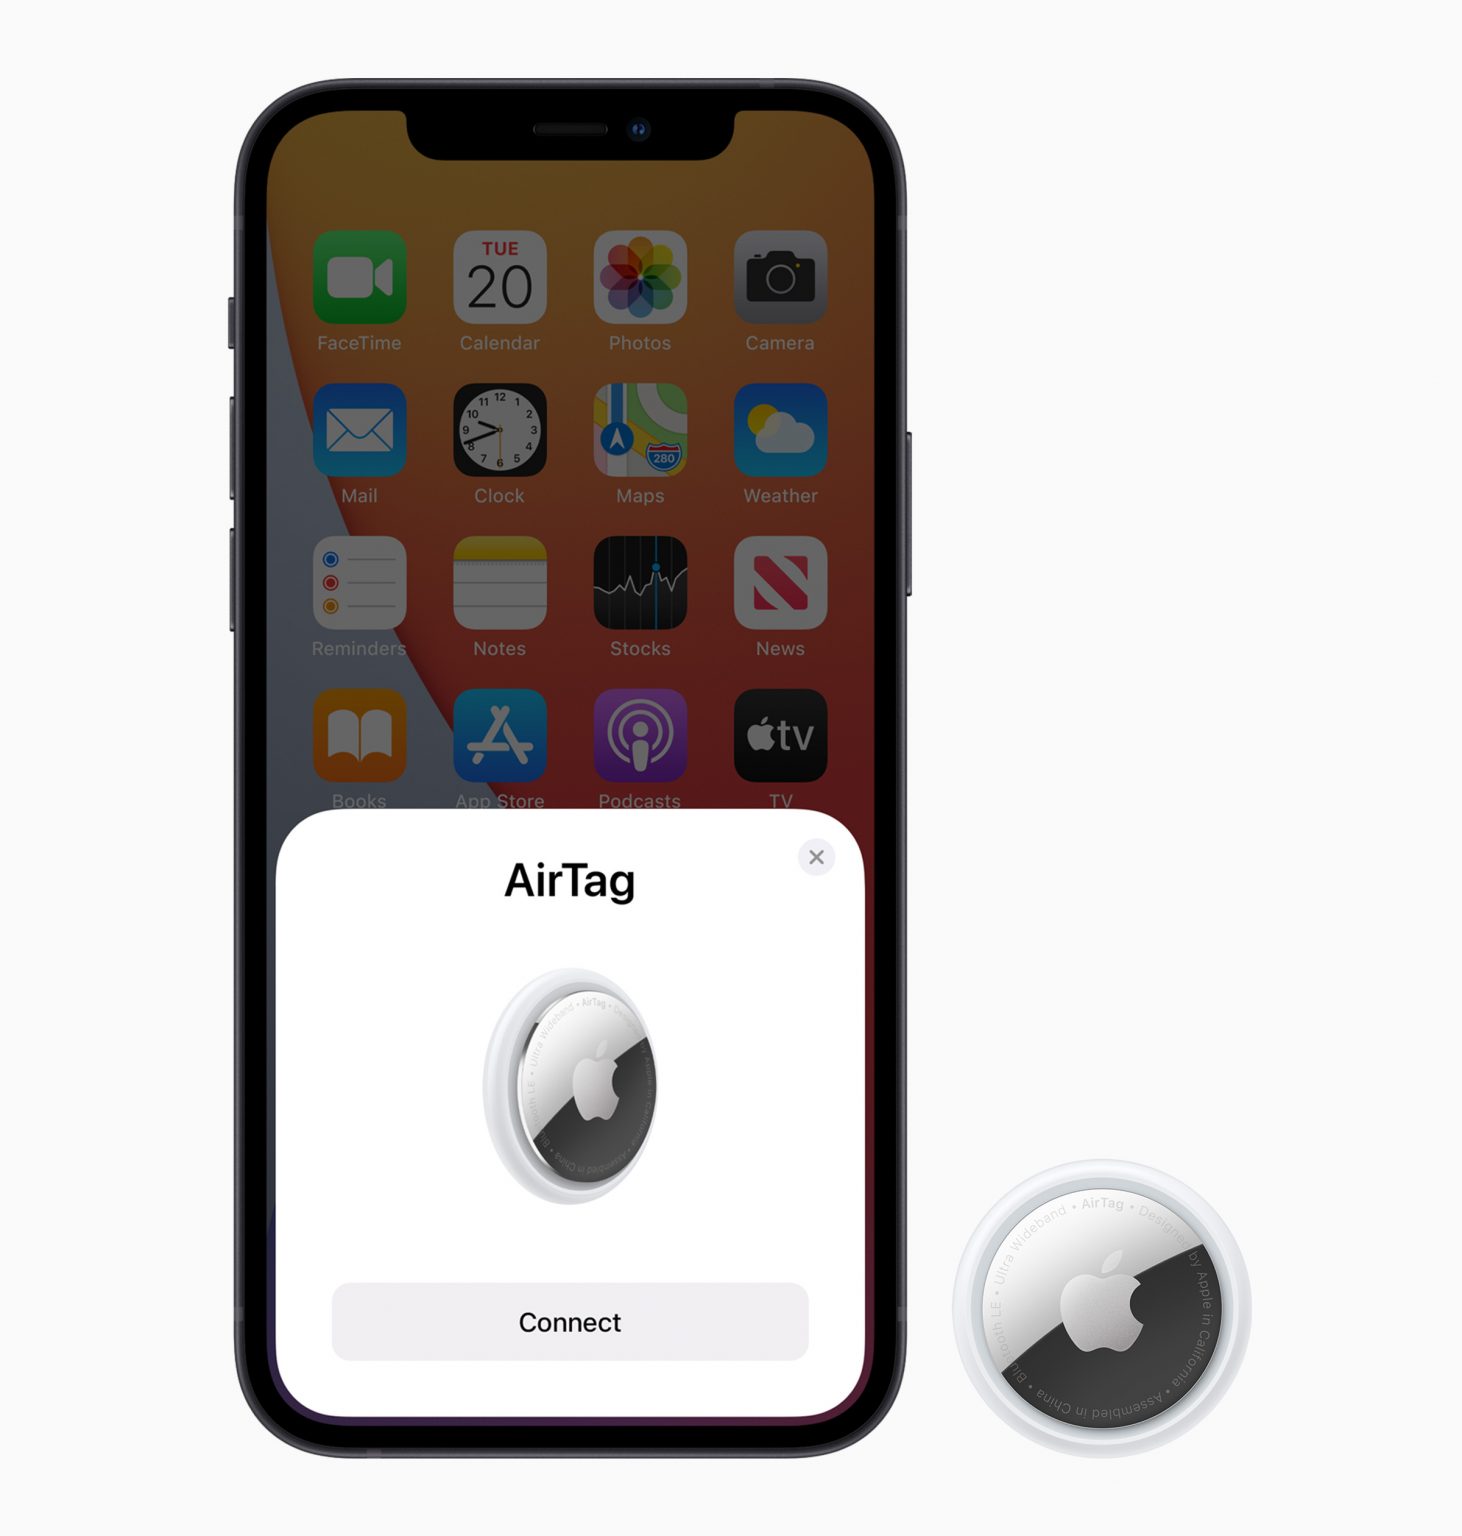 AirTag pairs easily with iPhone, much like AirPods.